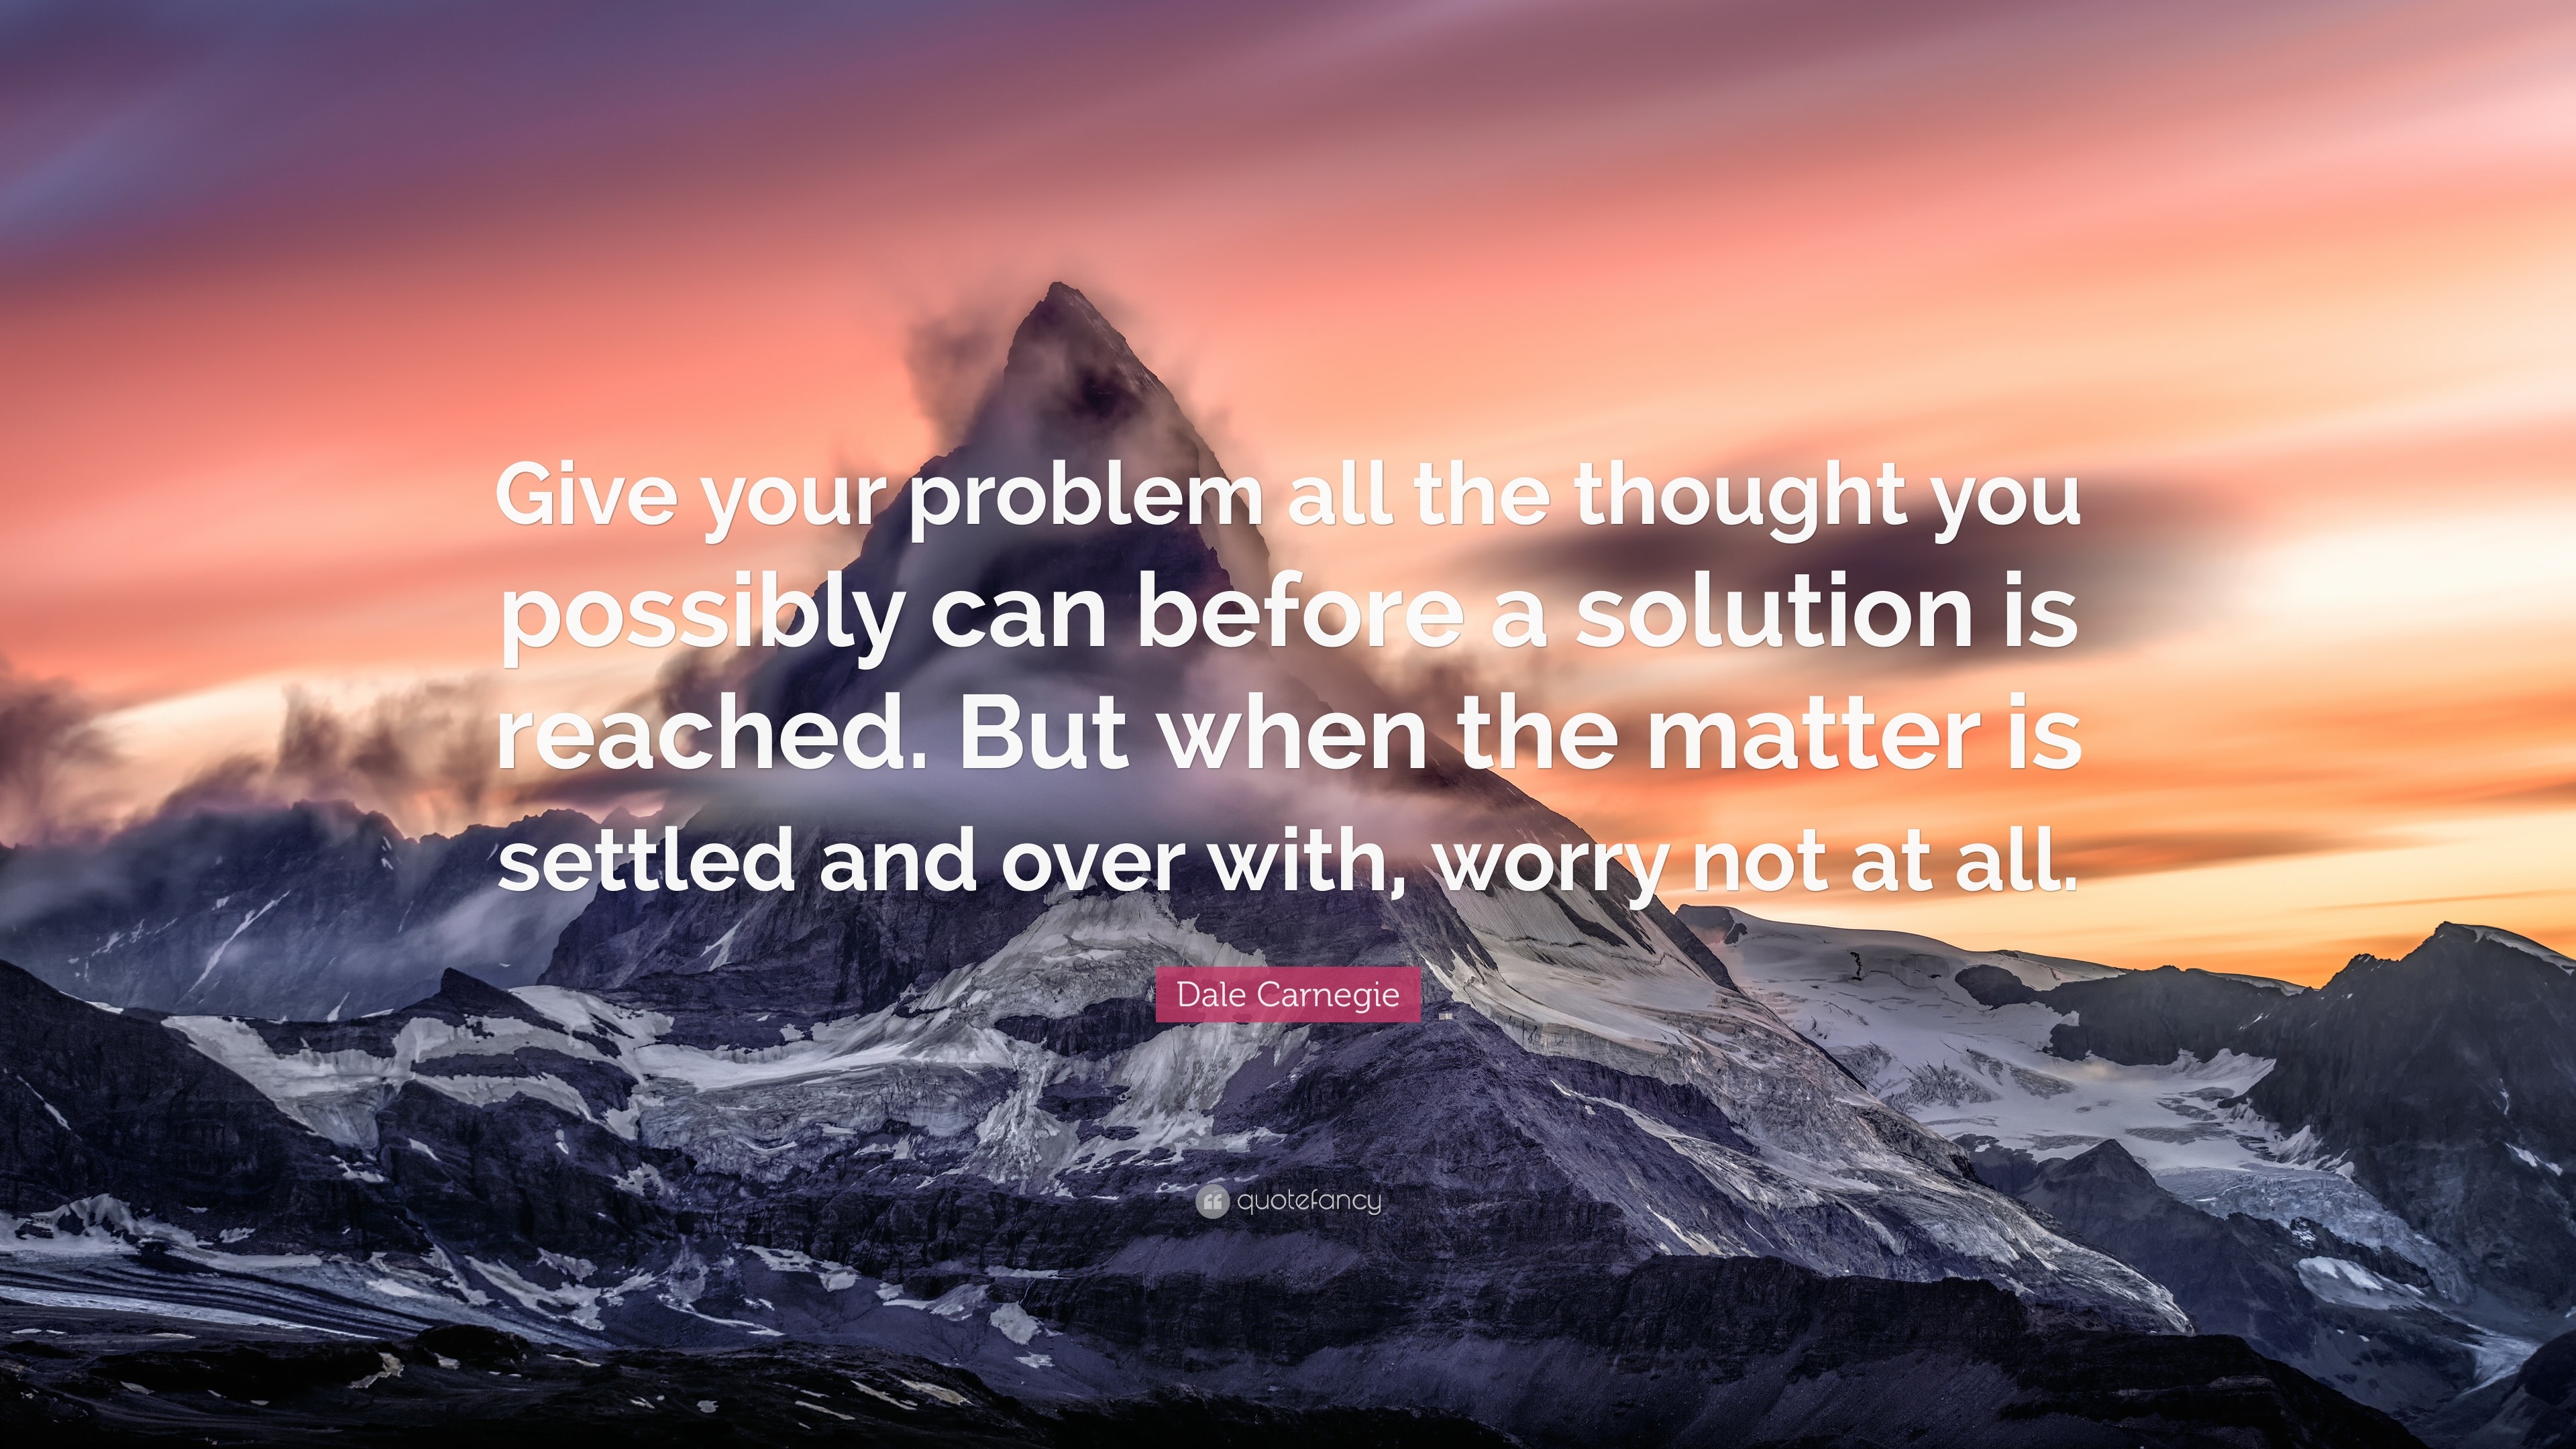 Dale Carnegie Quote: “Give your problem all the thought you possibly ...